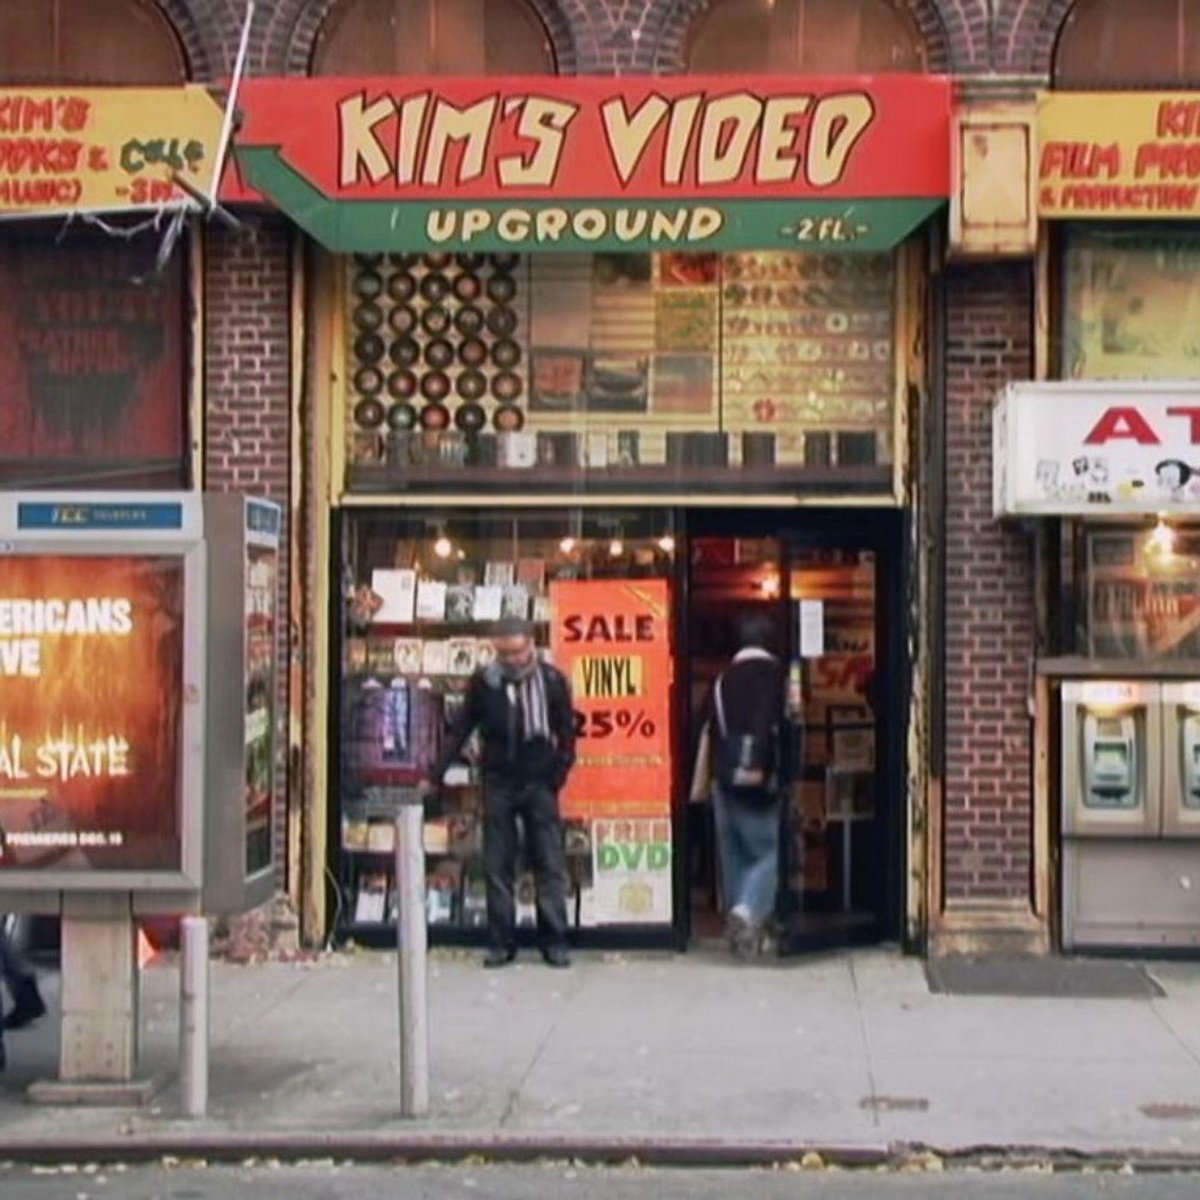 A new documentary tells the story of Kim's Video, the East Village video rental store for cool kids and independent art that closed in 2014. Founder Yongman Kim came on @AllOfItWNYC along with Ashley Sabin and David Redmon, co-directors of the documentary. wnyc.org/story/kims-vid…